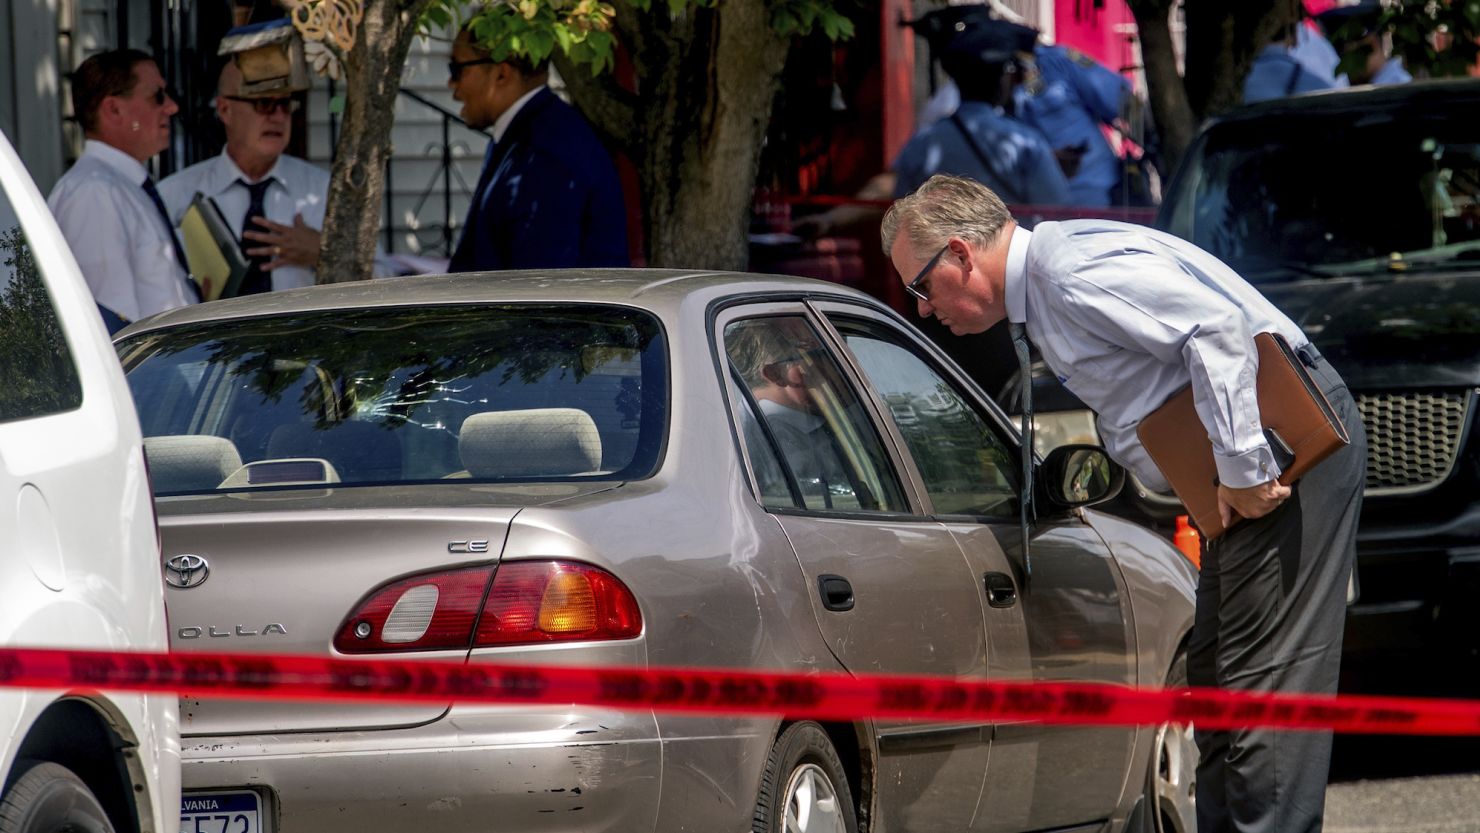 Authorities work the scene after a Philadelphia police officer fatally shot a man Monday. 